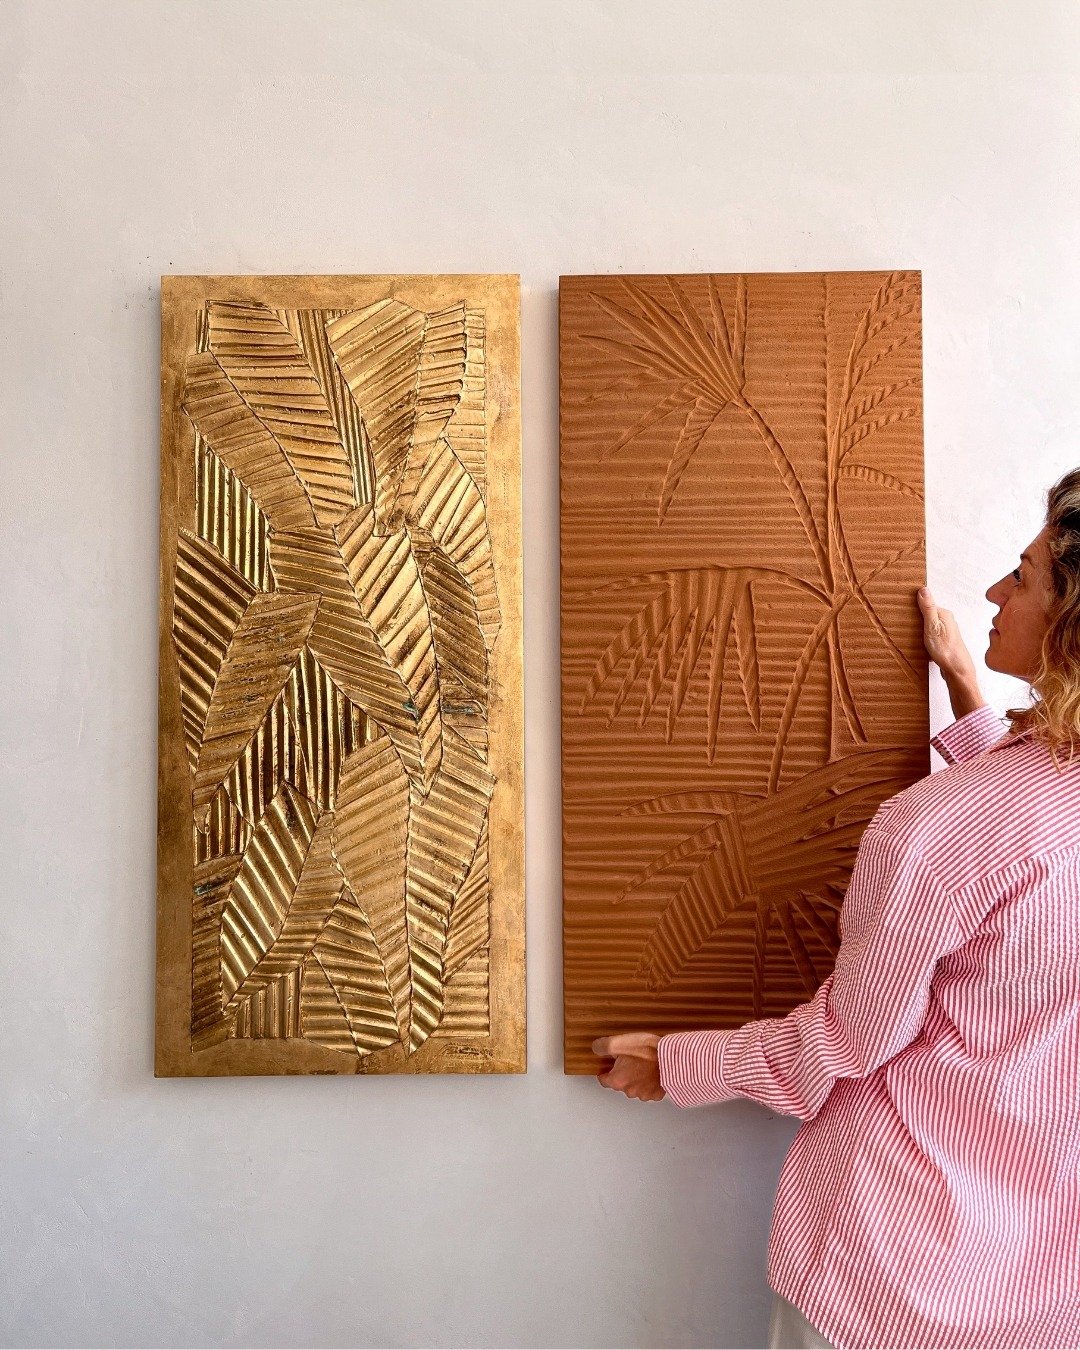 An interplay of gleaming gold and tropical vibrancy emerges, as the plaster artworks immerse in the radiant energy of the sun ✨

◾️ Golden Jungle
◾️ Terracotta Palm

#plaster #artwork #textureart #texture #art #nature #serenity #inspiration #hongkong